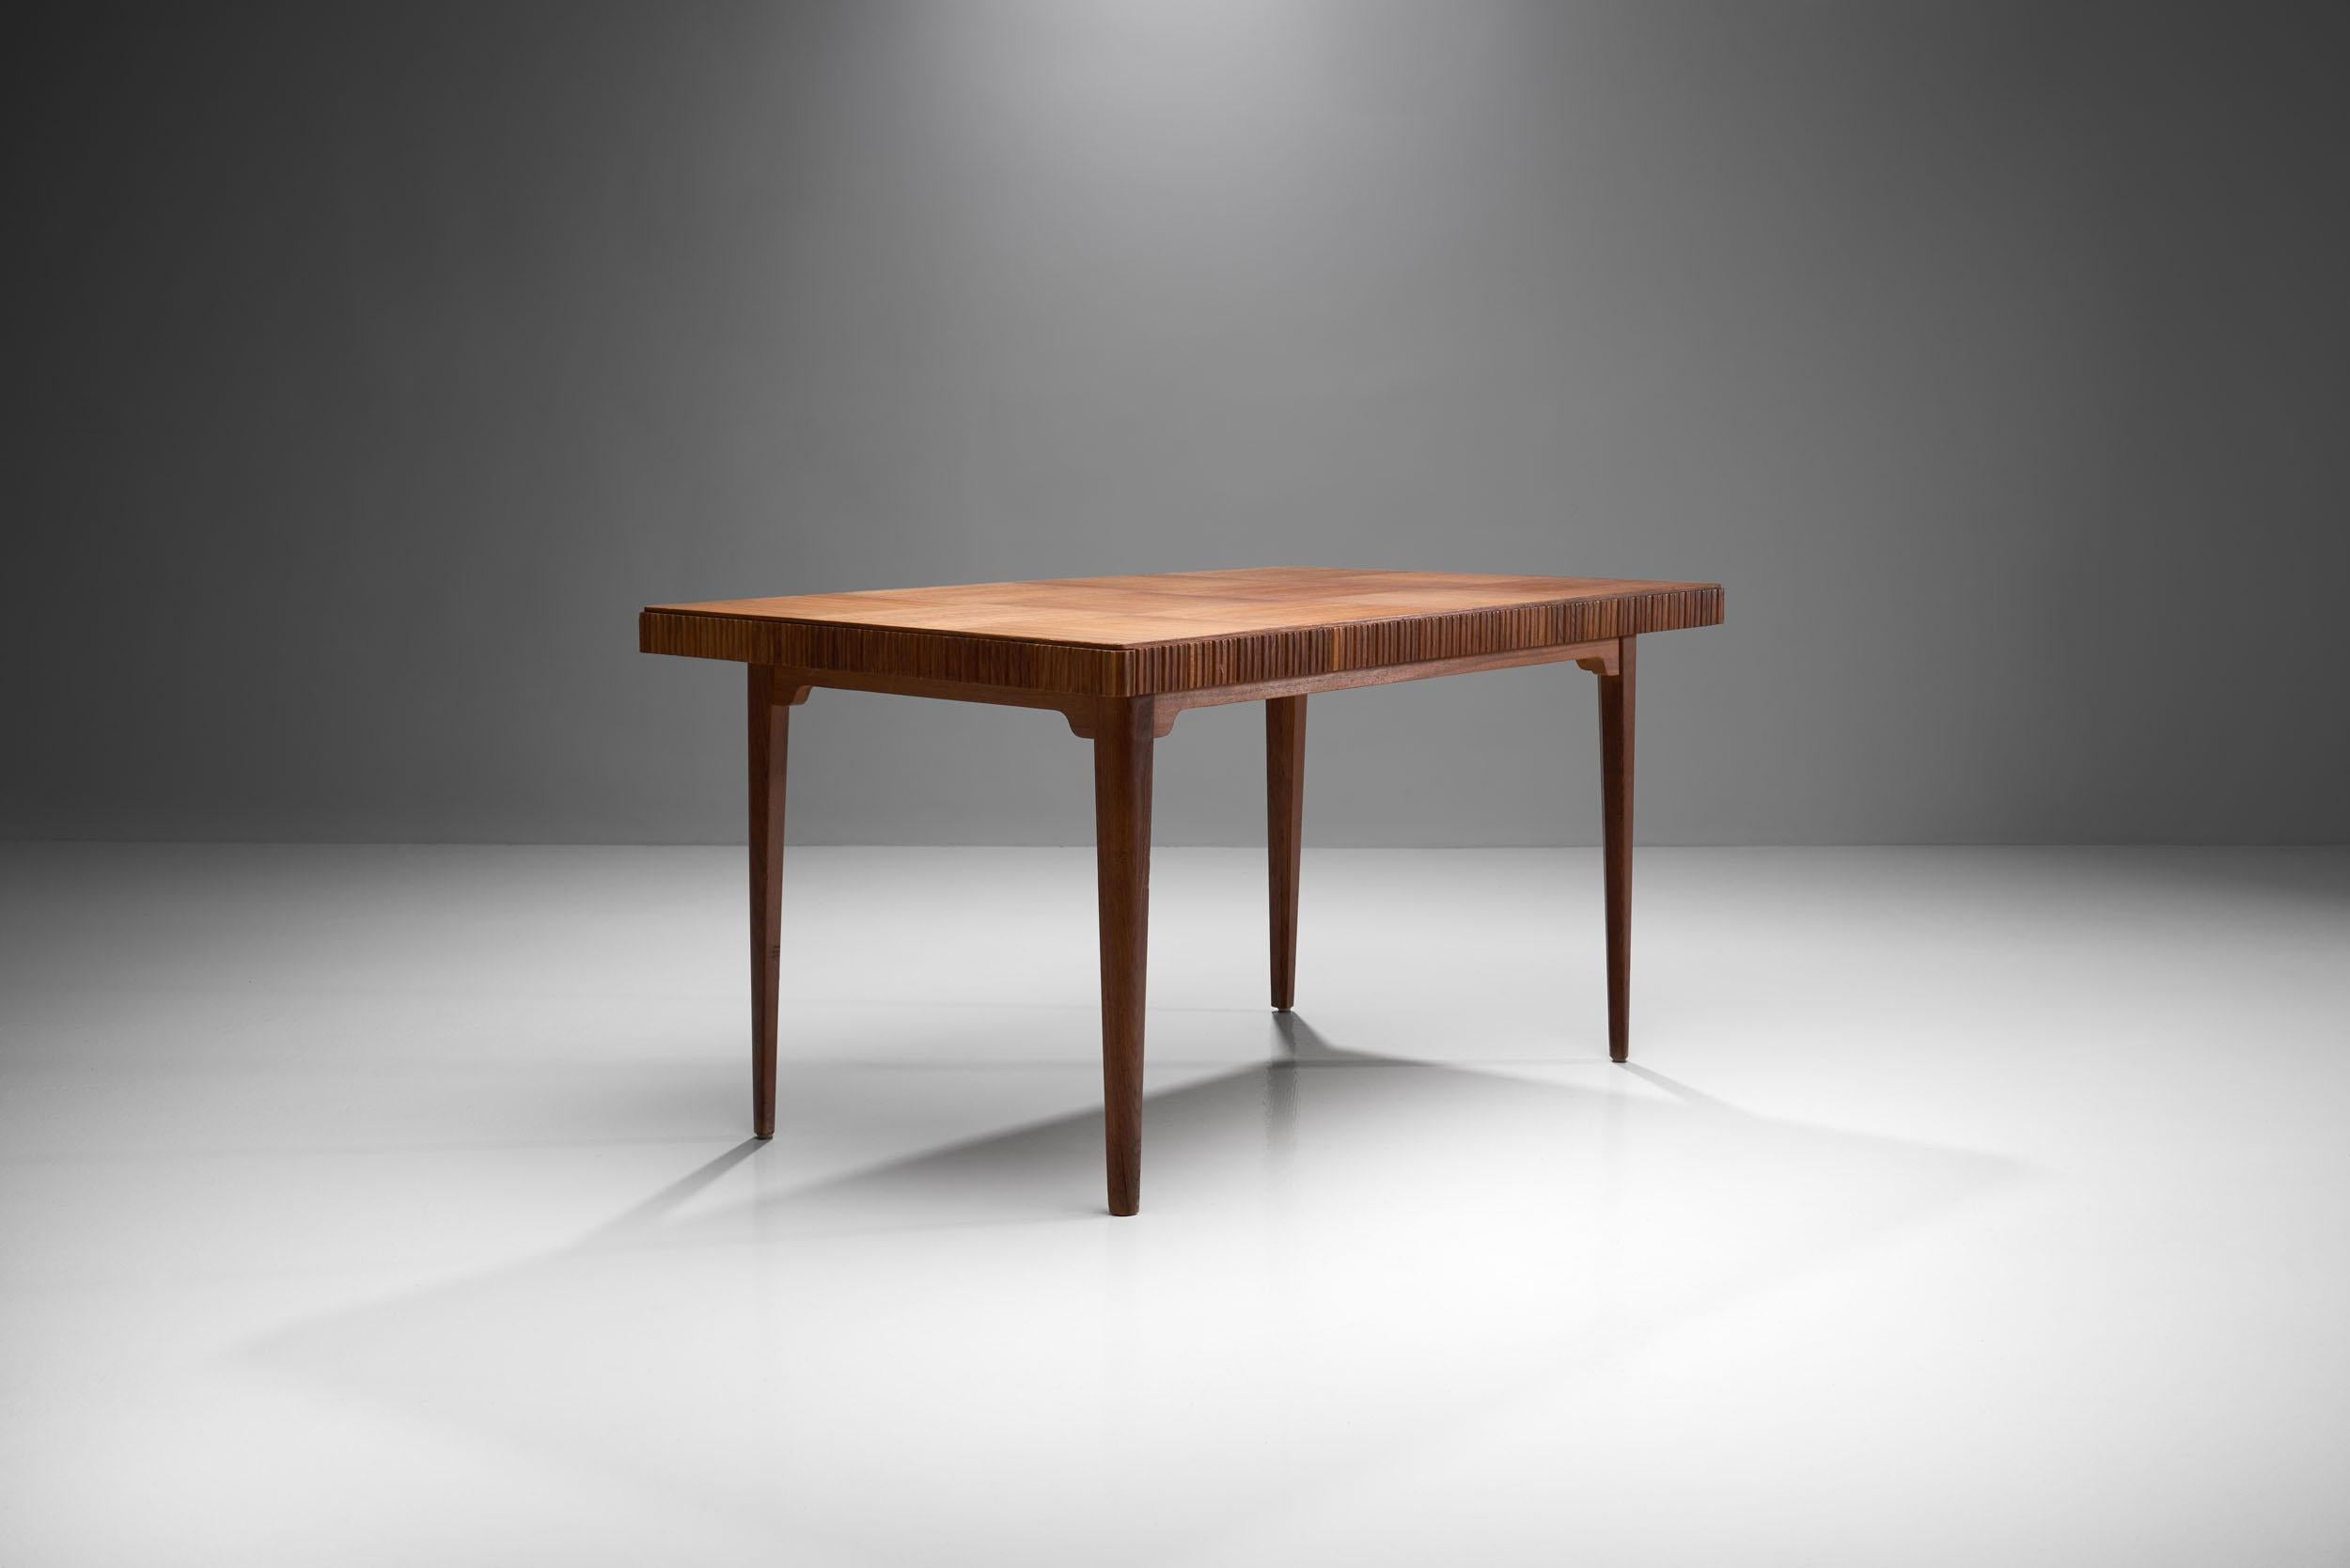 An exquisitely crafted Scandinavian Modern table. Made out of wood in cognac brown tones. This table has a thick top with a beautiful pattern that plays with vertical and horizontal lines creating a mosaic effect. The thick edge of the cover is